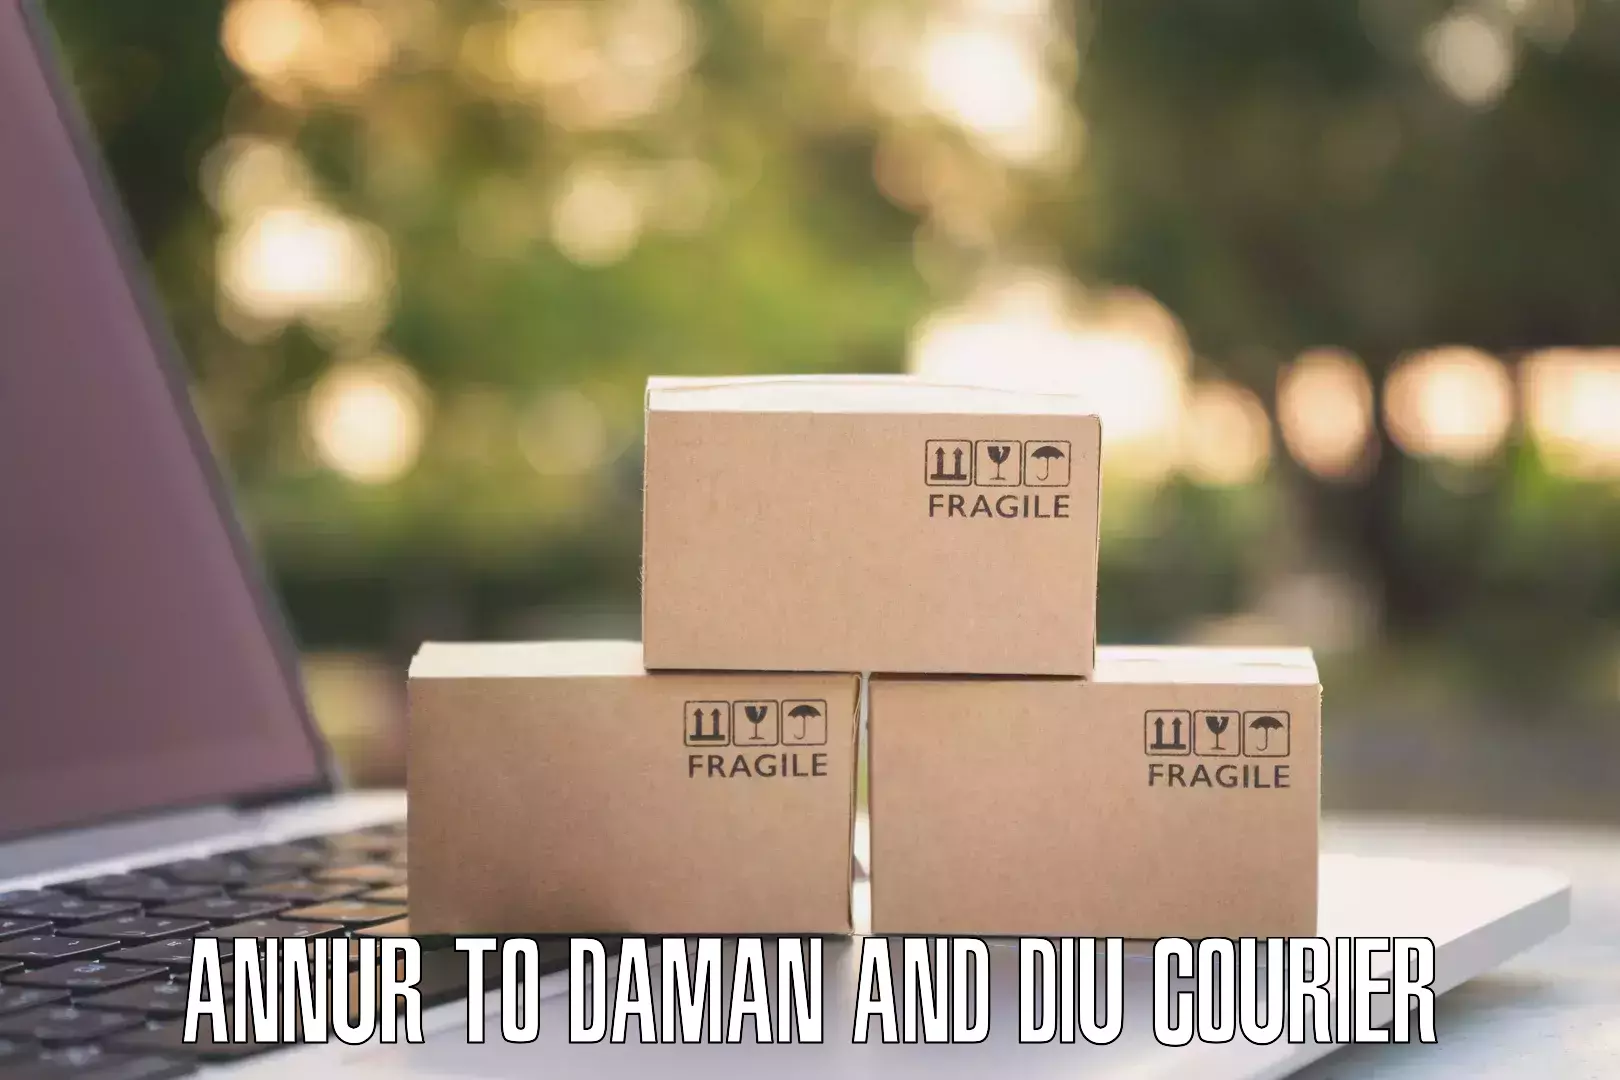 Express shipping in Annur to Daman